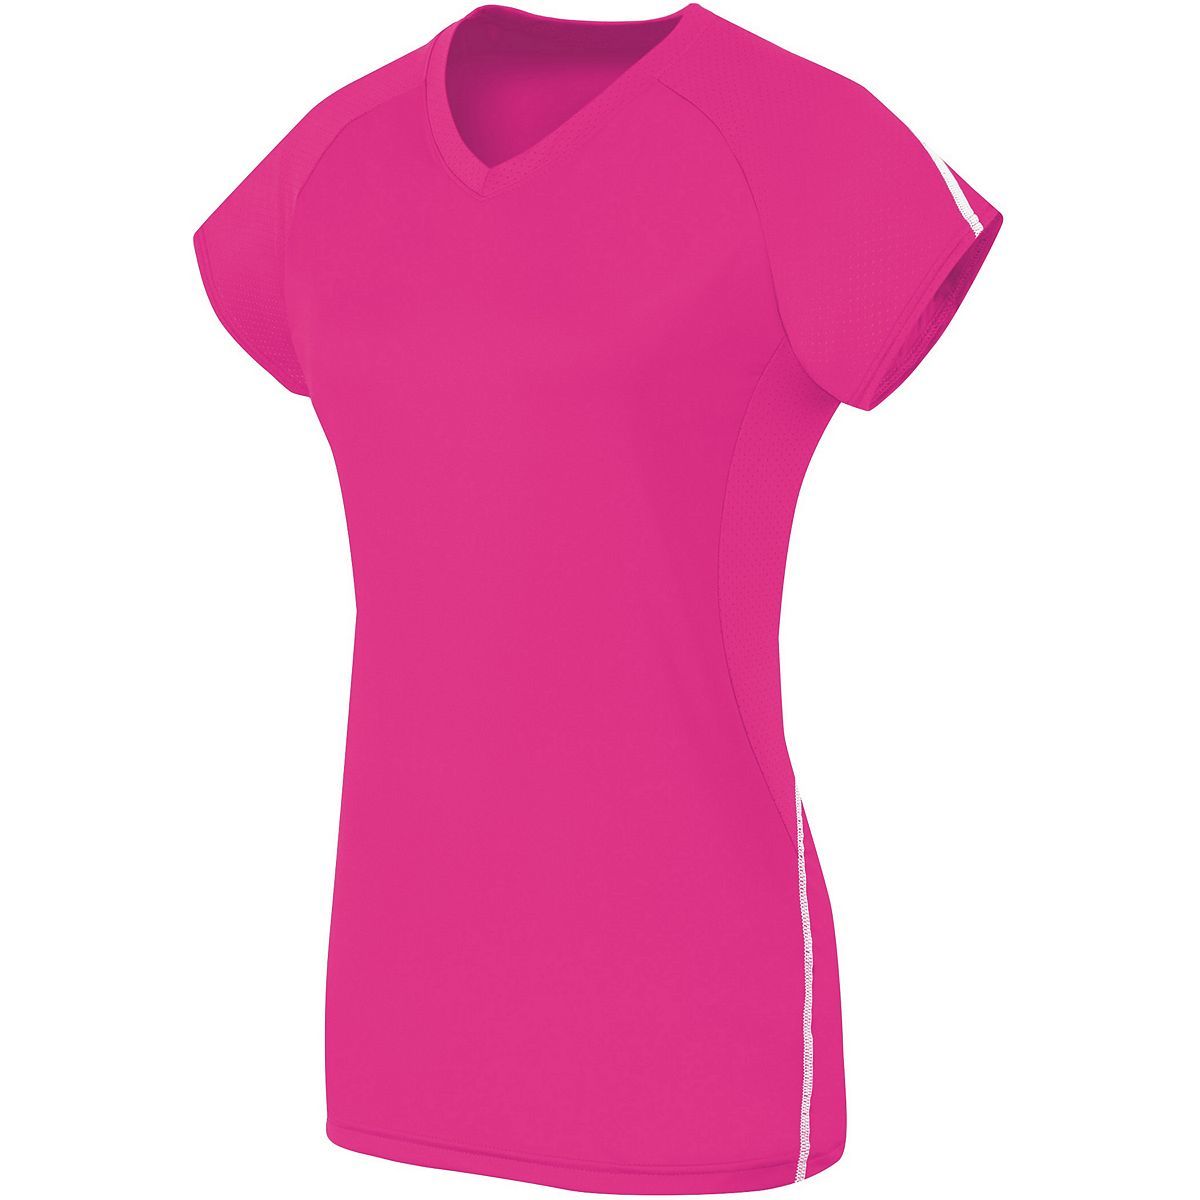 High 5 Ladies Short Sleeve Solid Jersey in Raspberry/White  -Part of the Ladies, Ladies-Jersey, High5-Products, Volleyball, Shirts product lines at KanaleyCreations.com